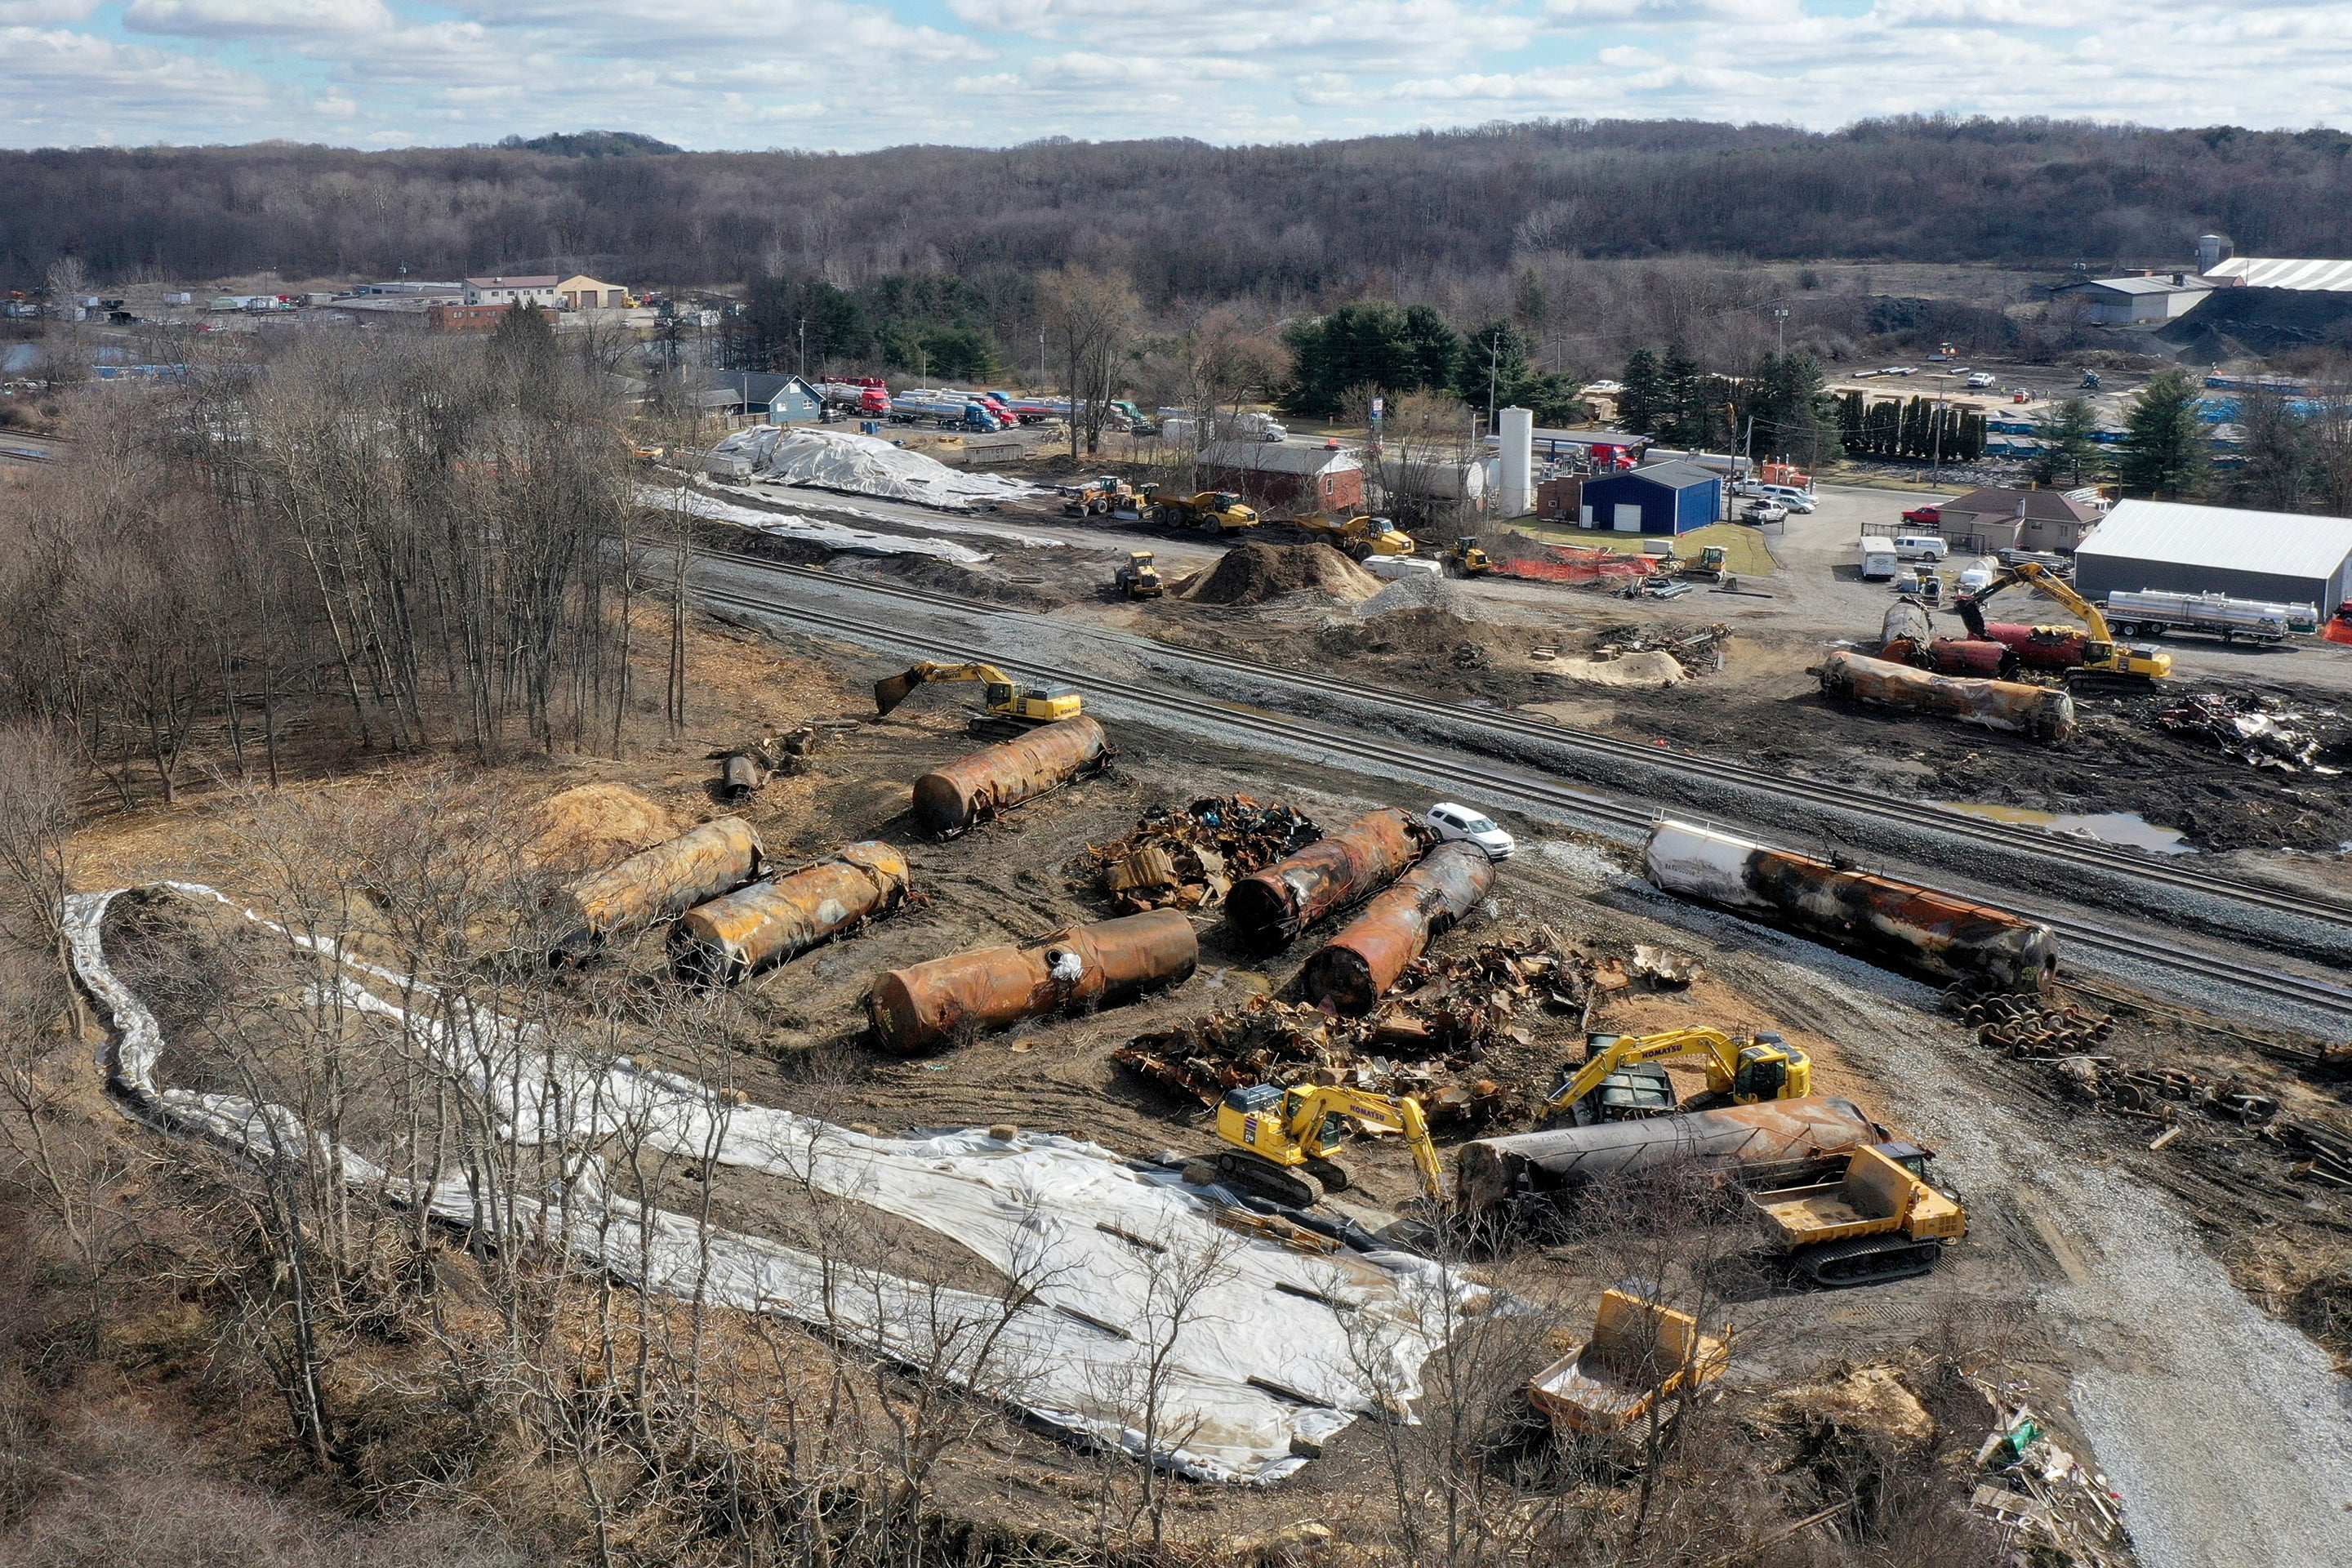 Questions remain about long-term impacts of chemicals released in derailment